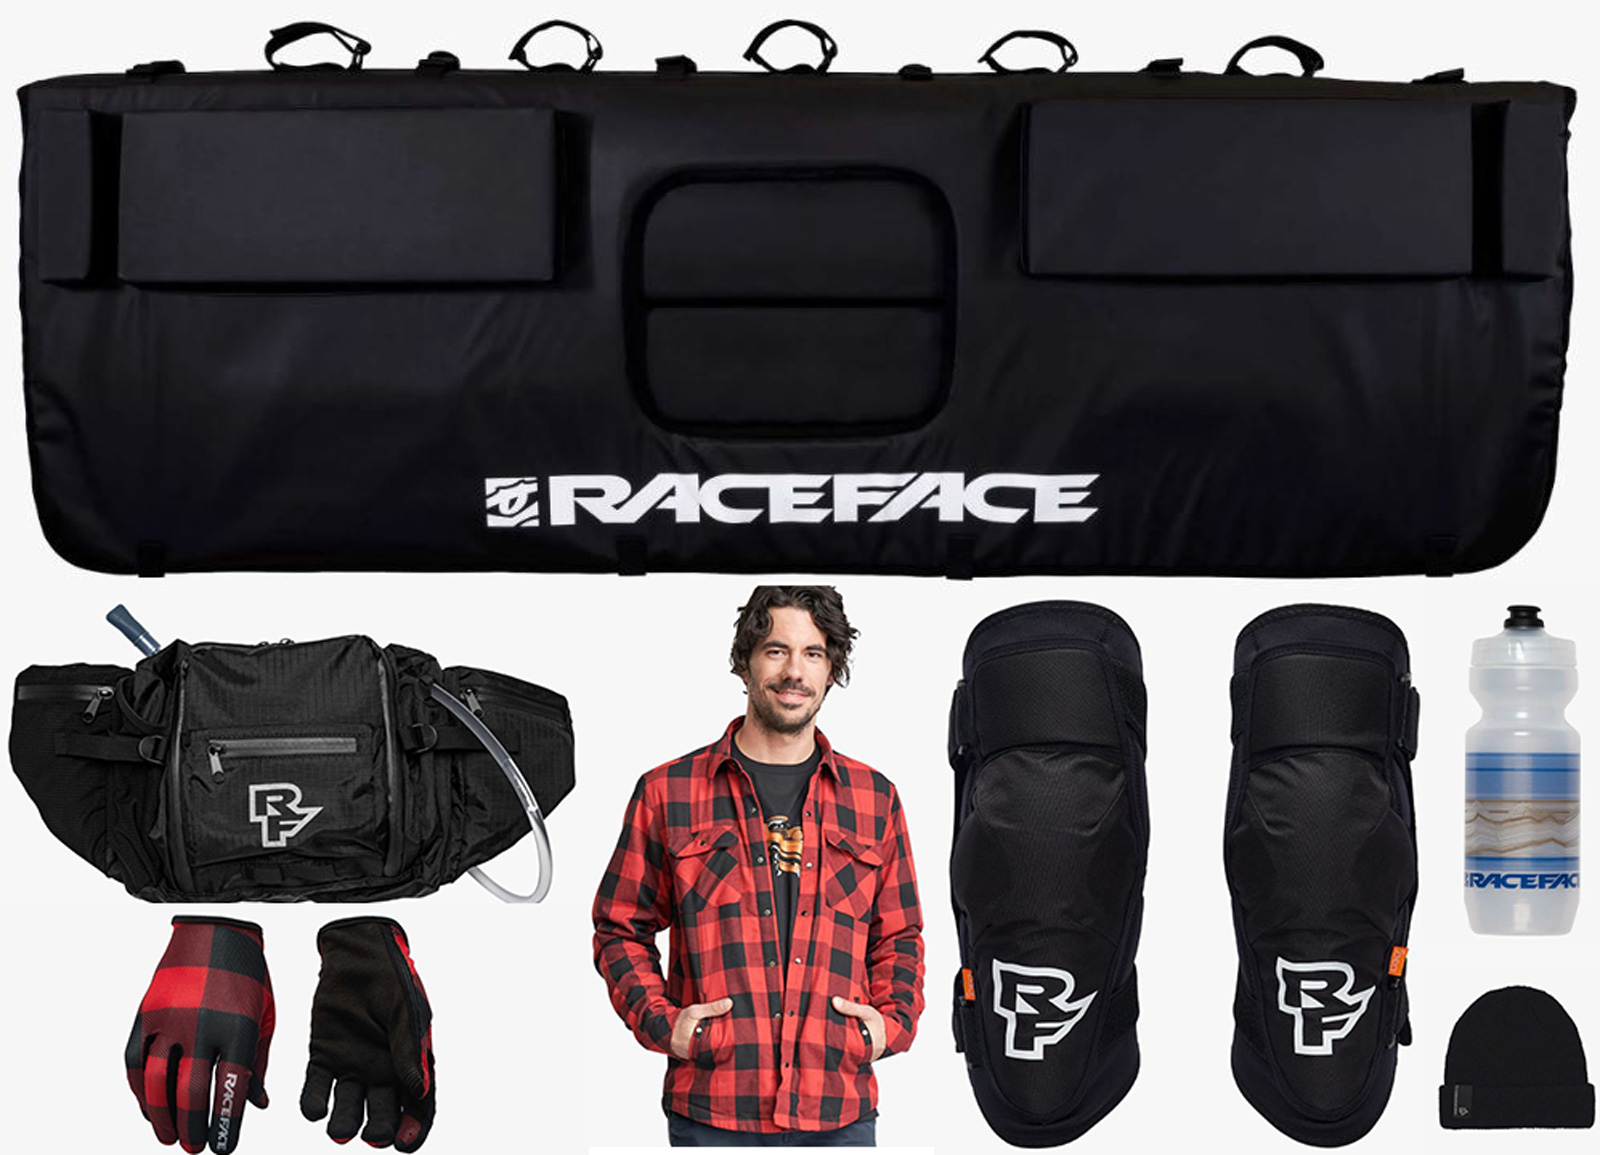 race face tailgate pad sale pre black friday deals clothing gear